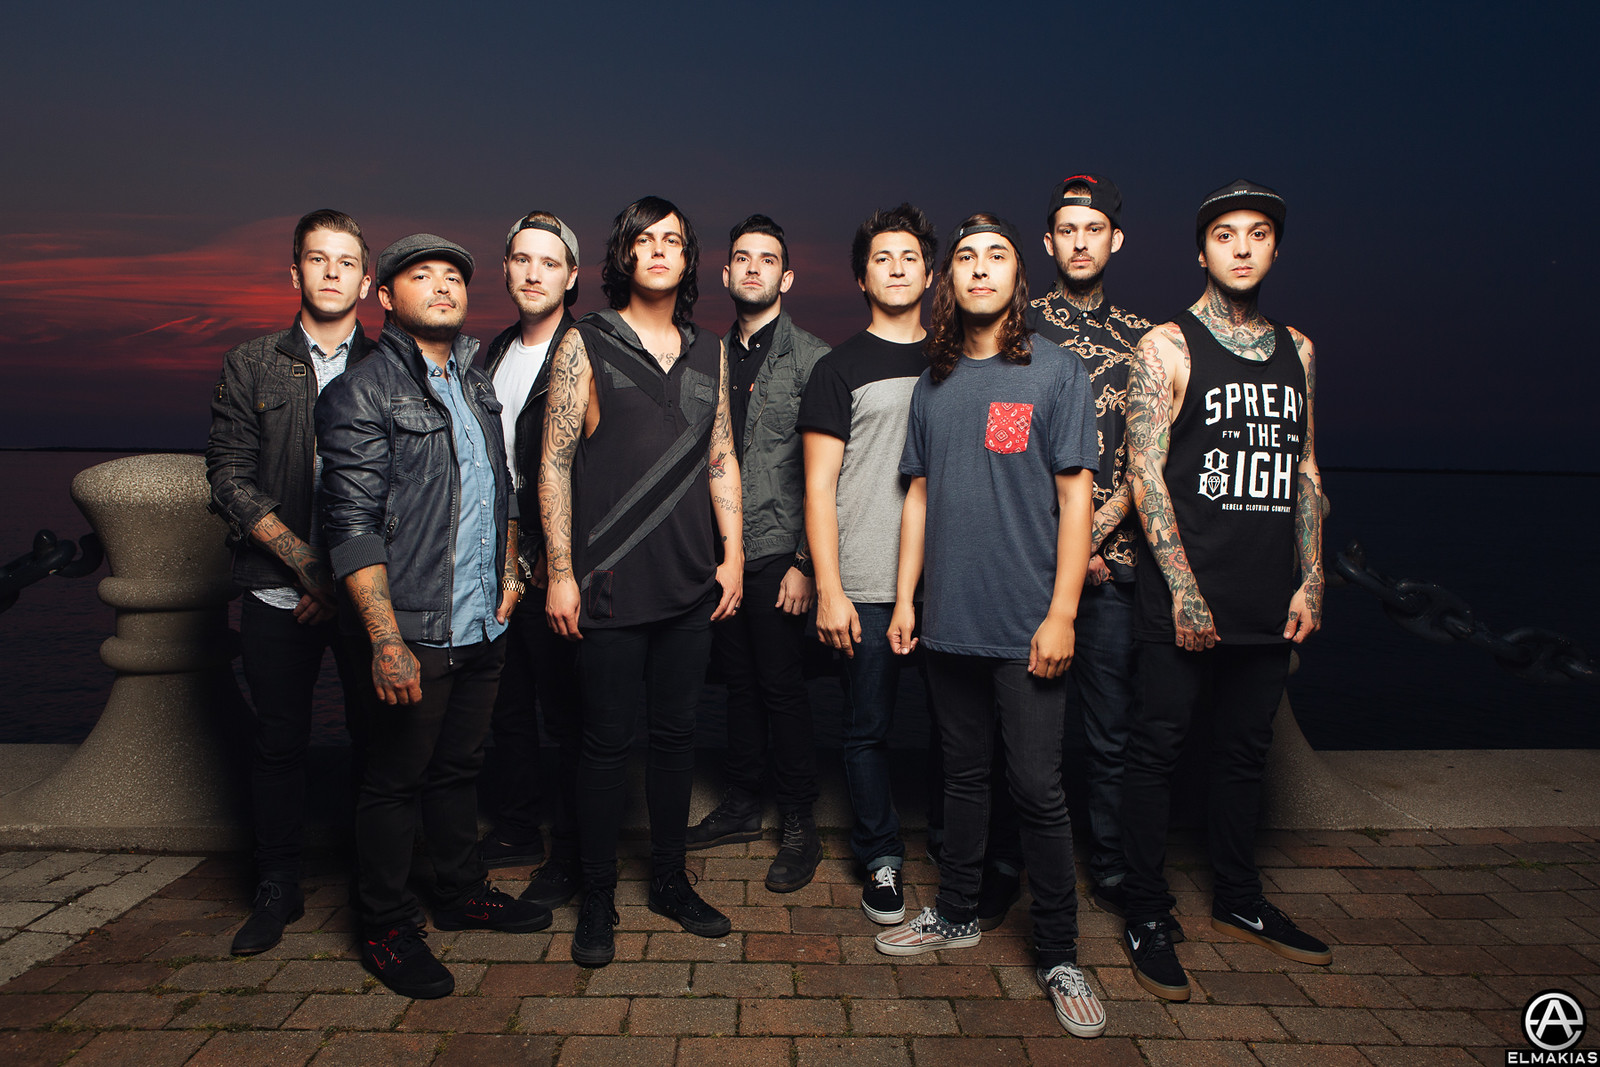 Pierce The Veil and Sleeping with Sirens final press photo from The World Tour shoot